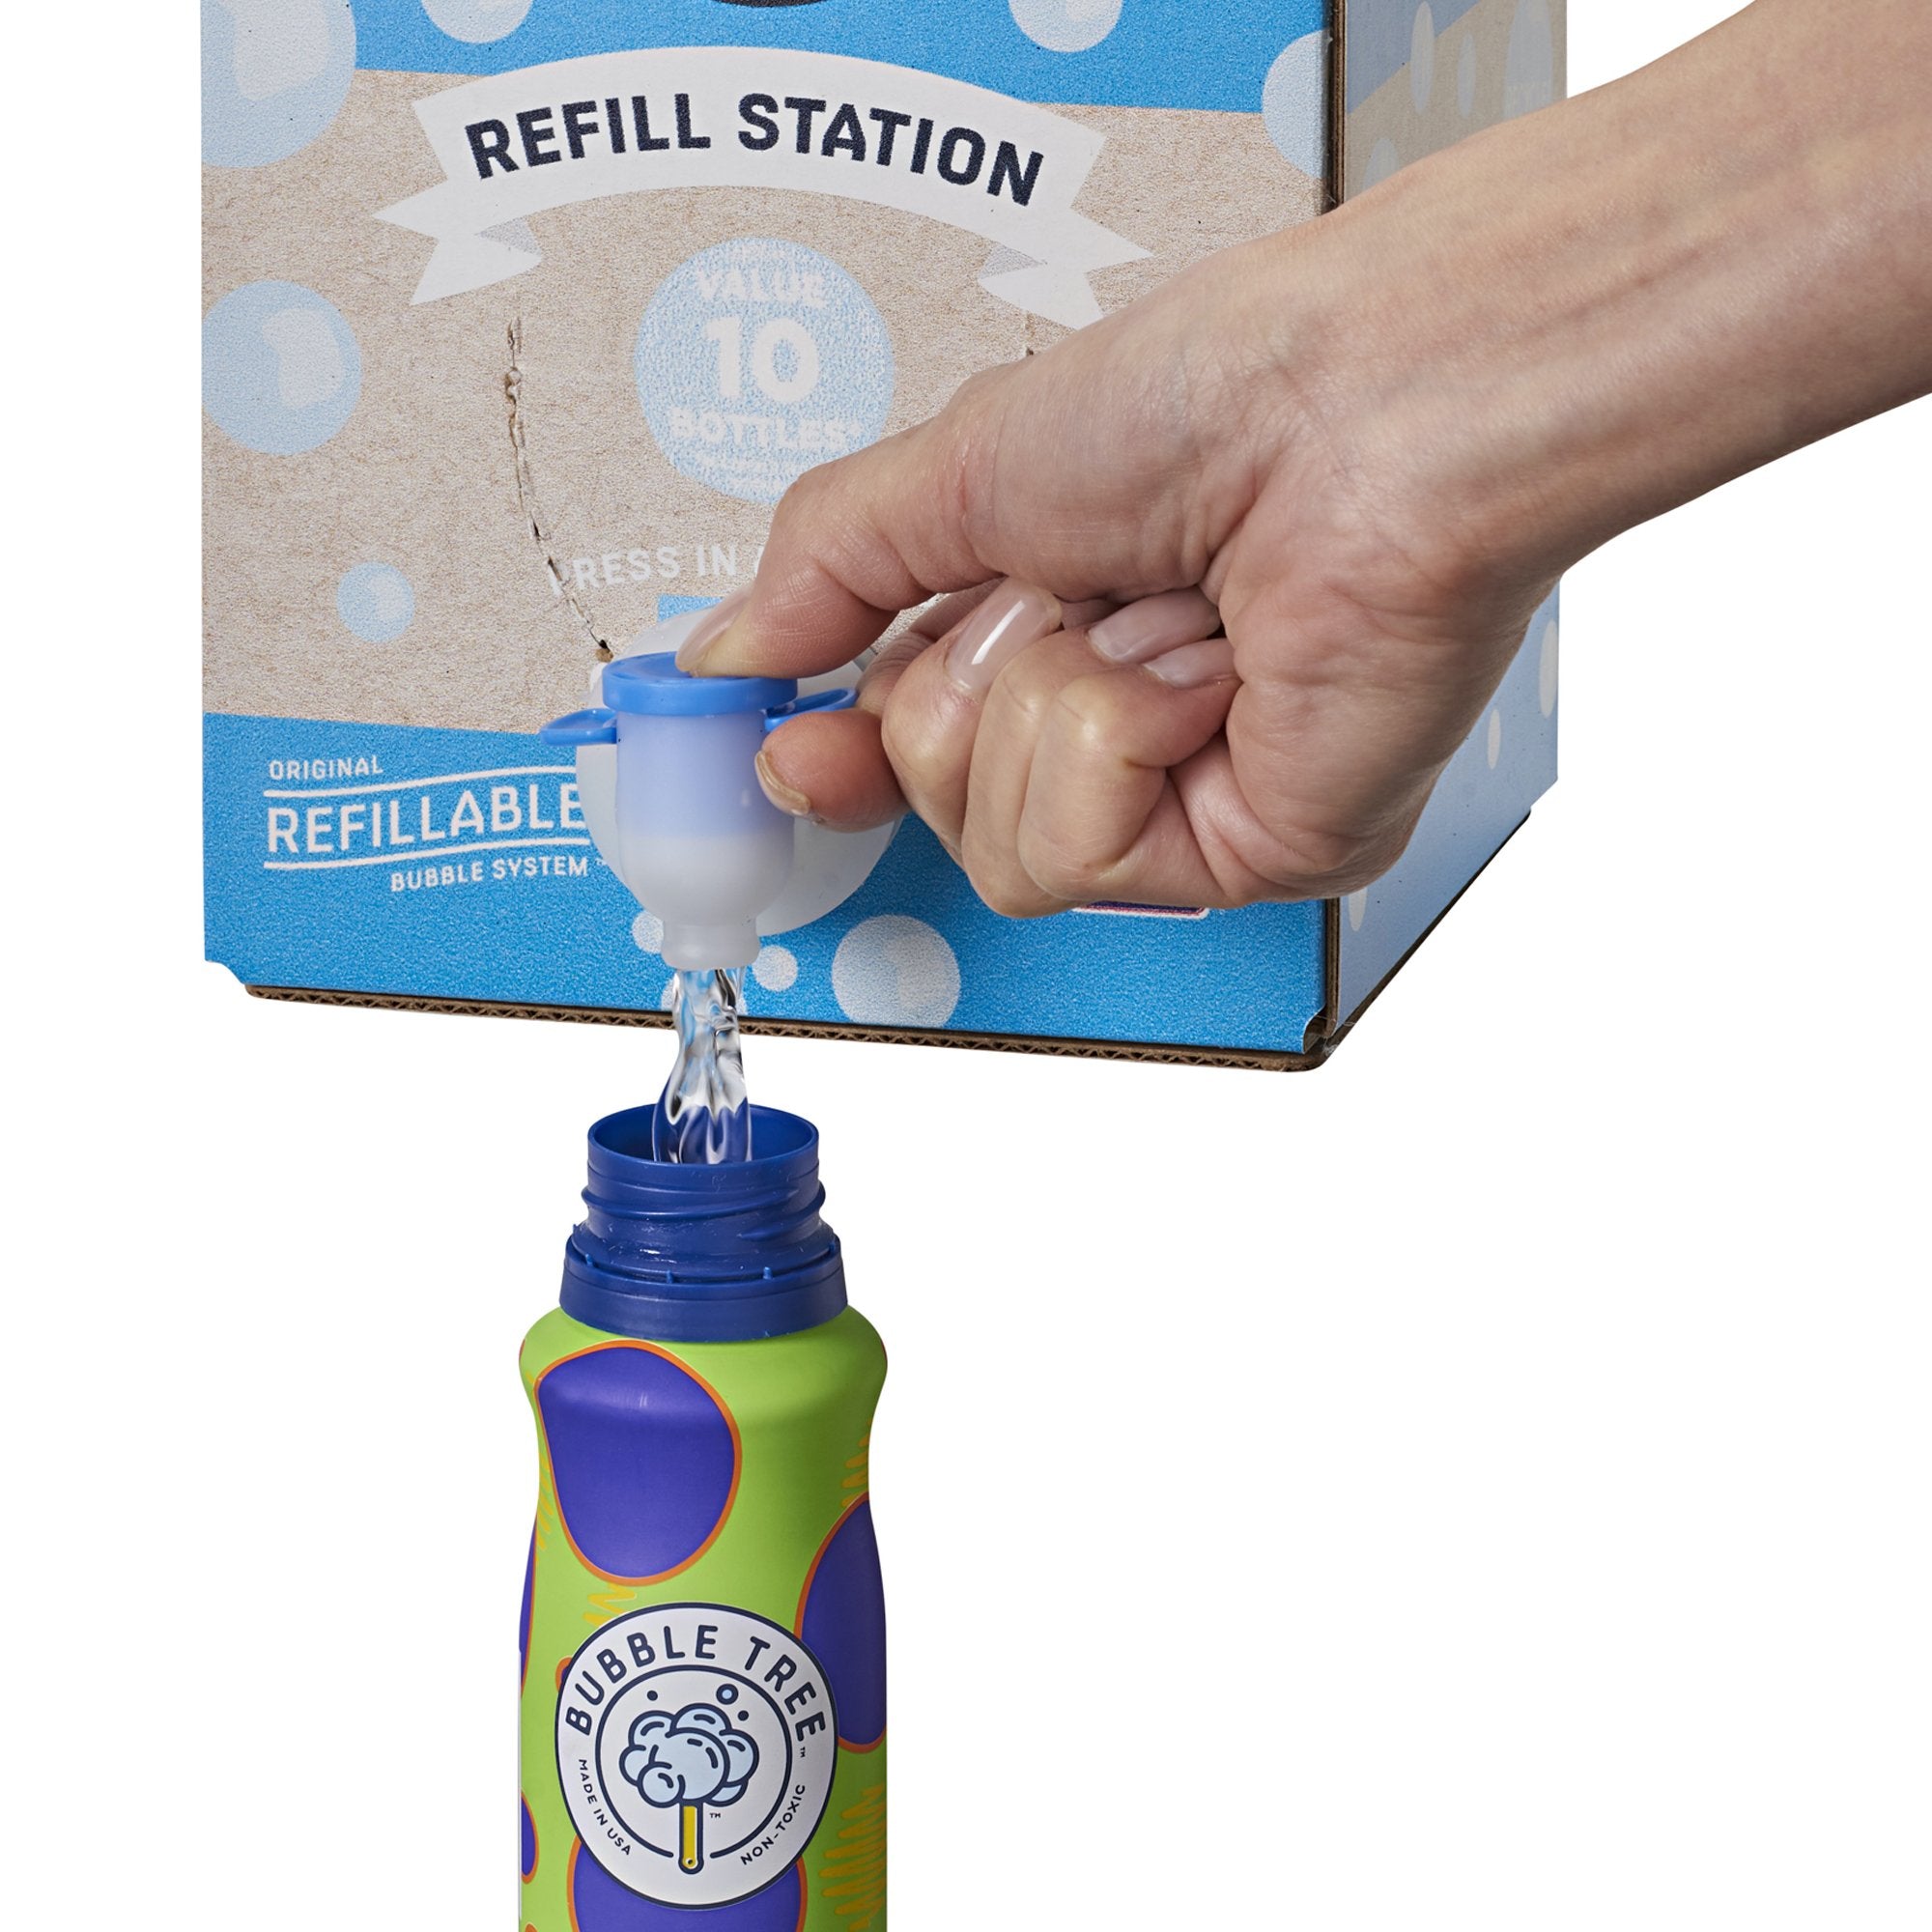 2 Bottles and 1L Refill - Bubble Tree Refillable Bubble System    